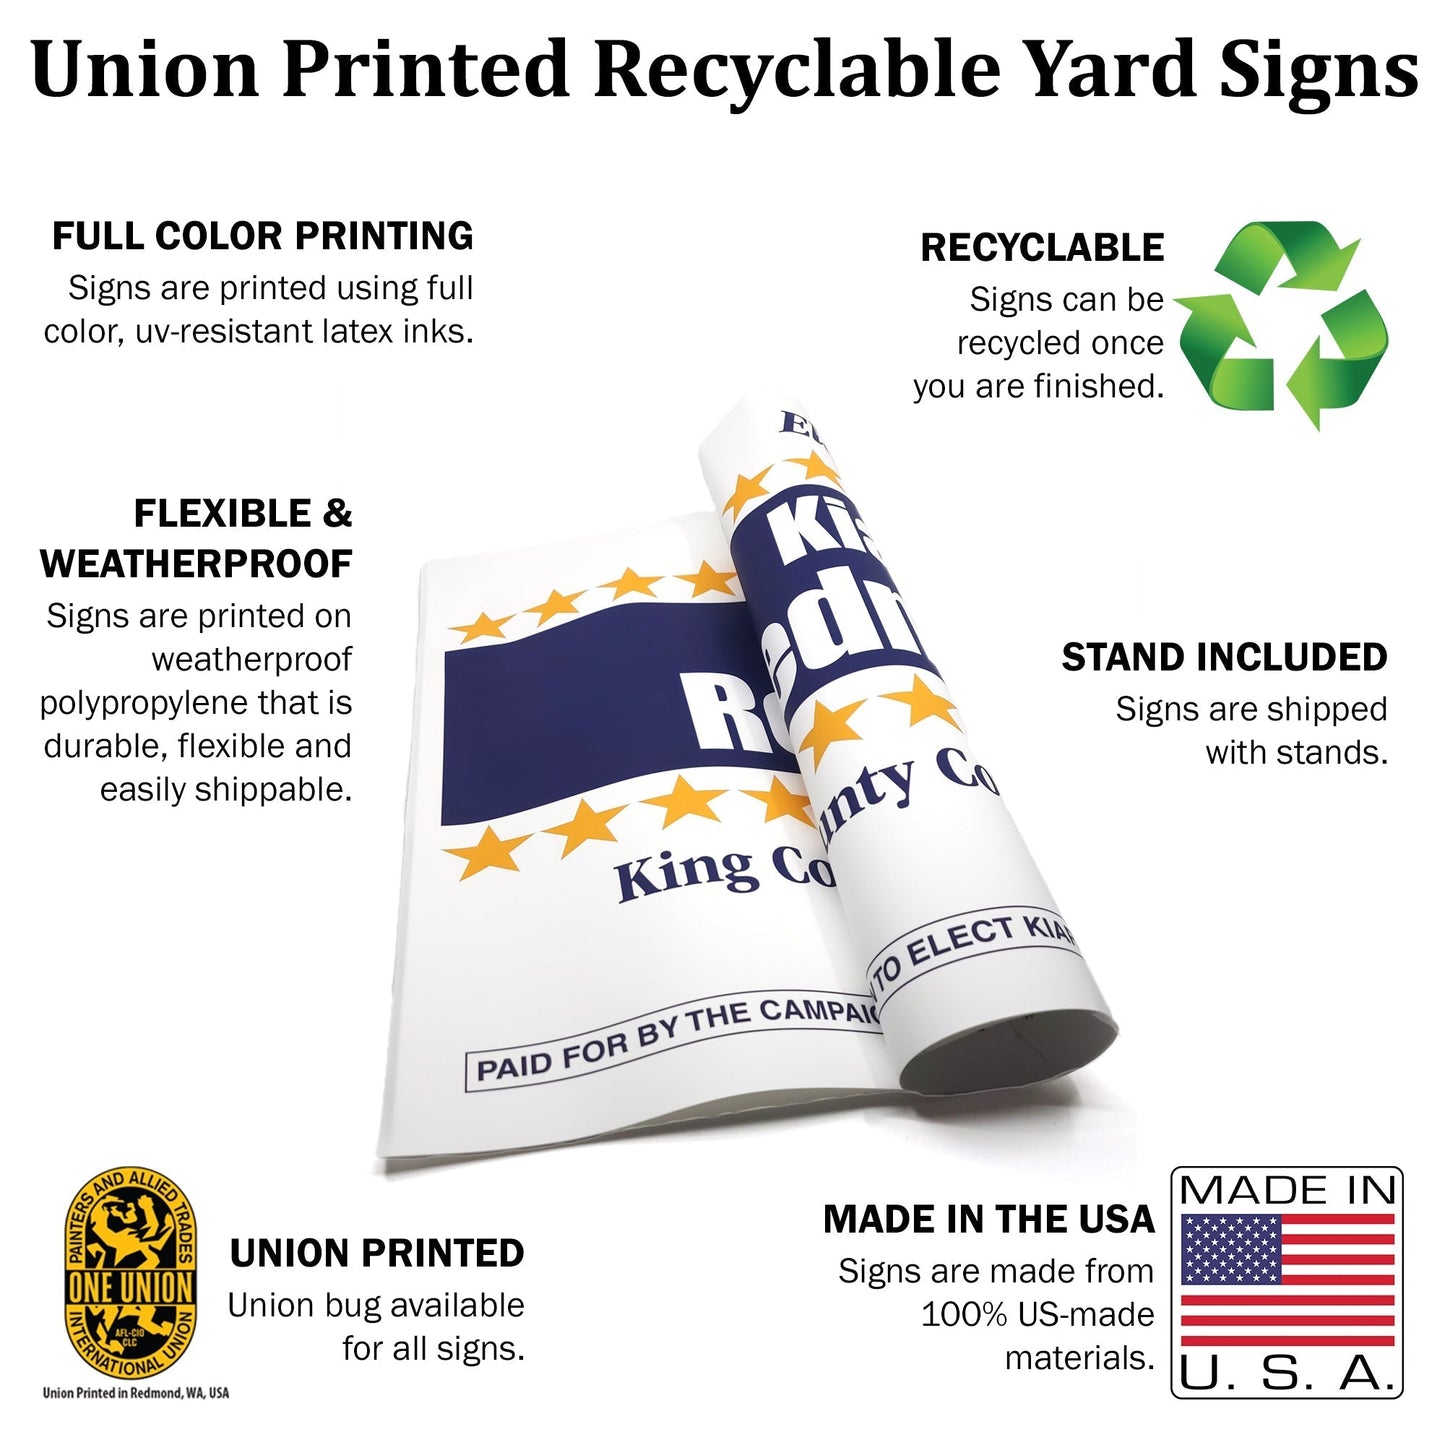 MerchBlue Union-Printed Yard Sign - 24x18 - Laurel design - Recyclable - Made in the USA